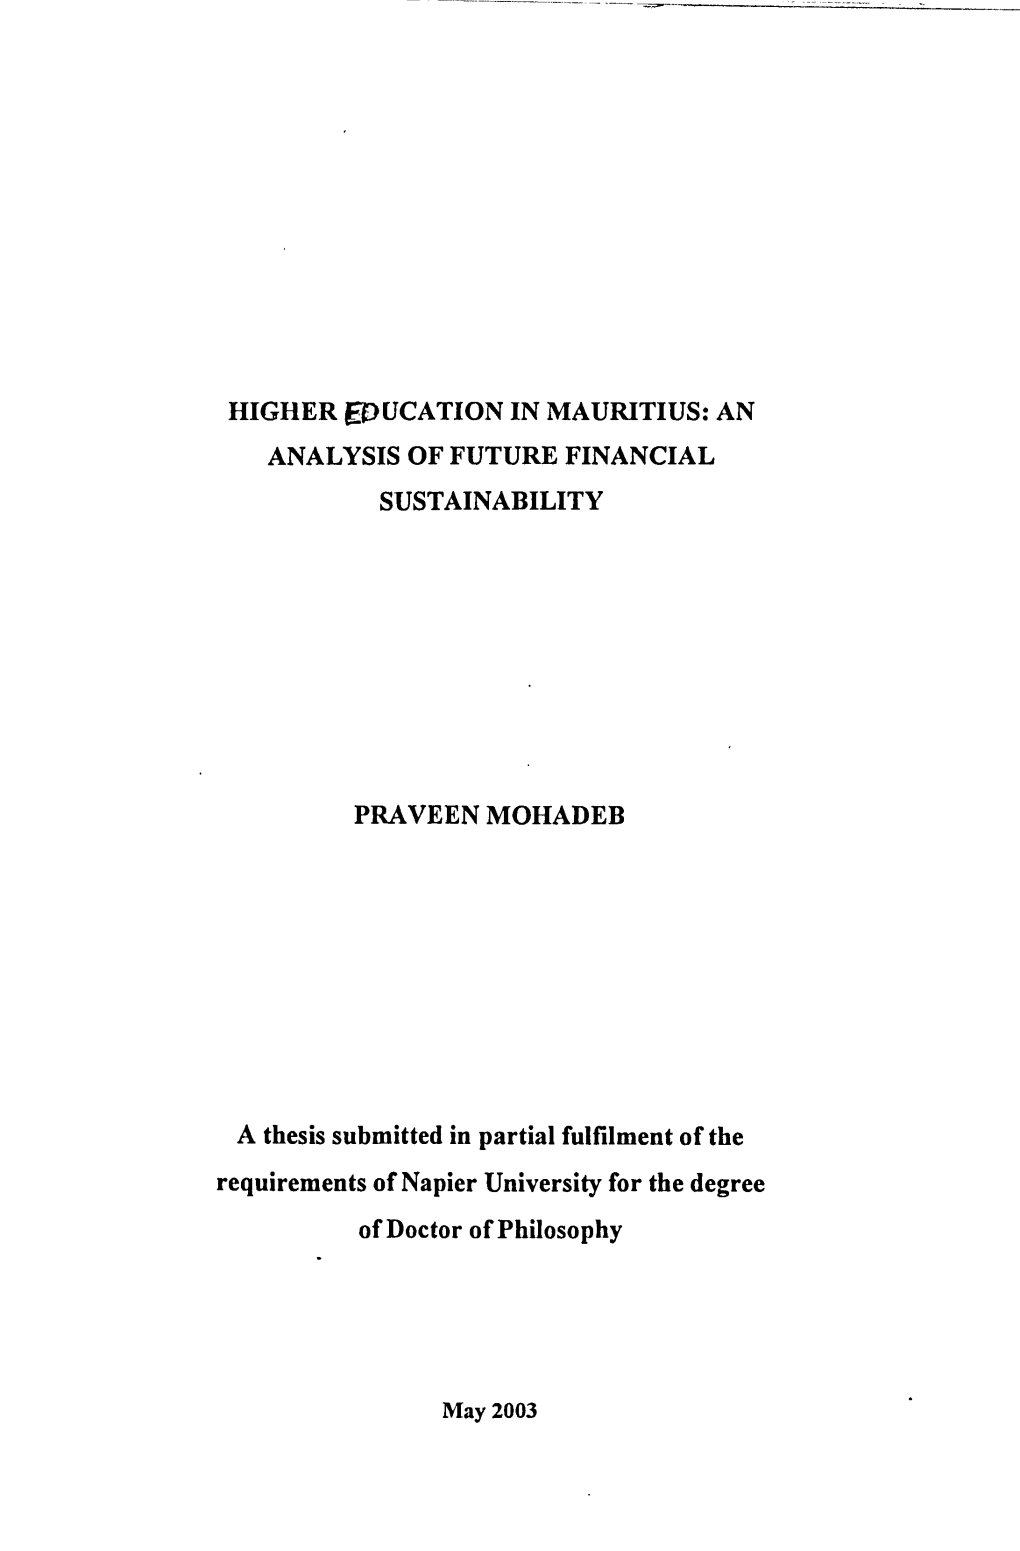 Higher Education in Mauritius: an Analysis of Future Financial Sustainability